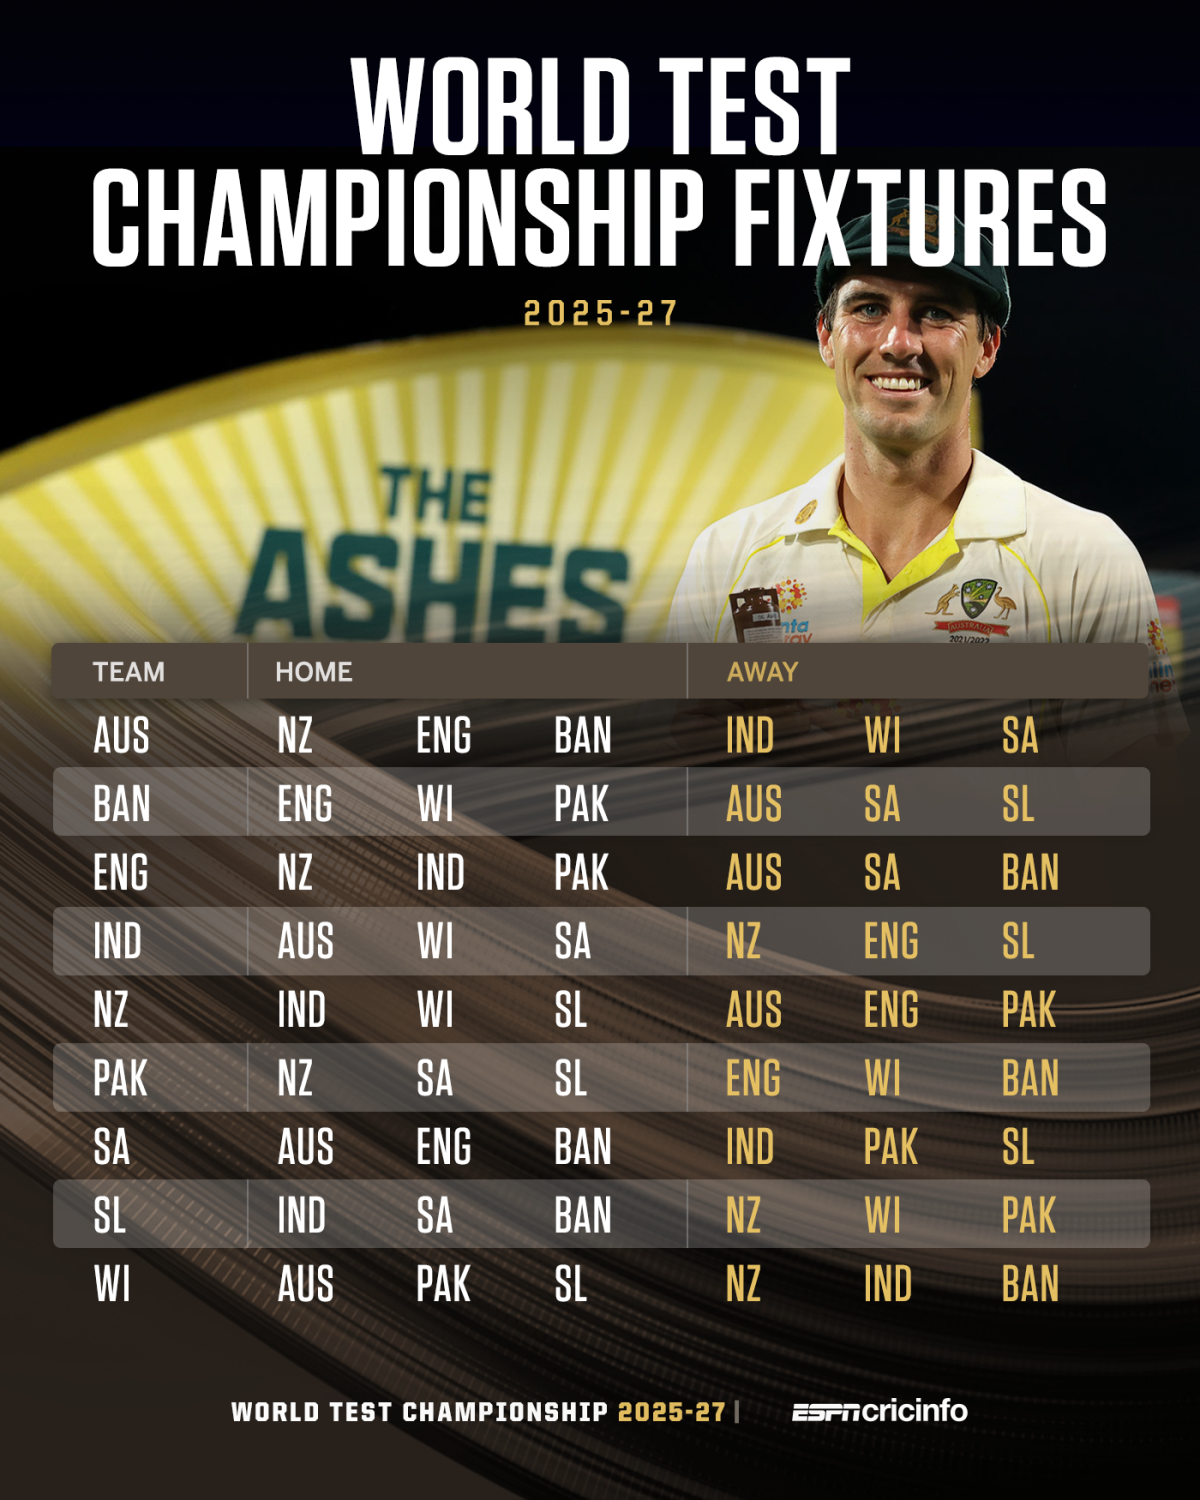 The World Test Championship fixtures for the 202527 cycle